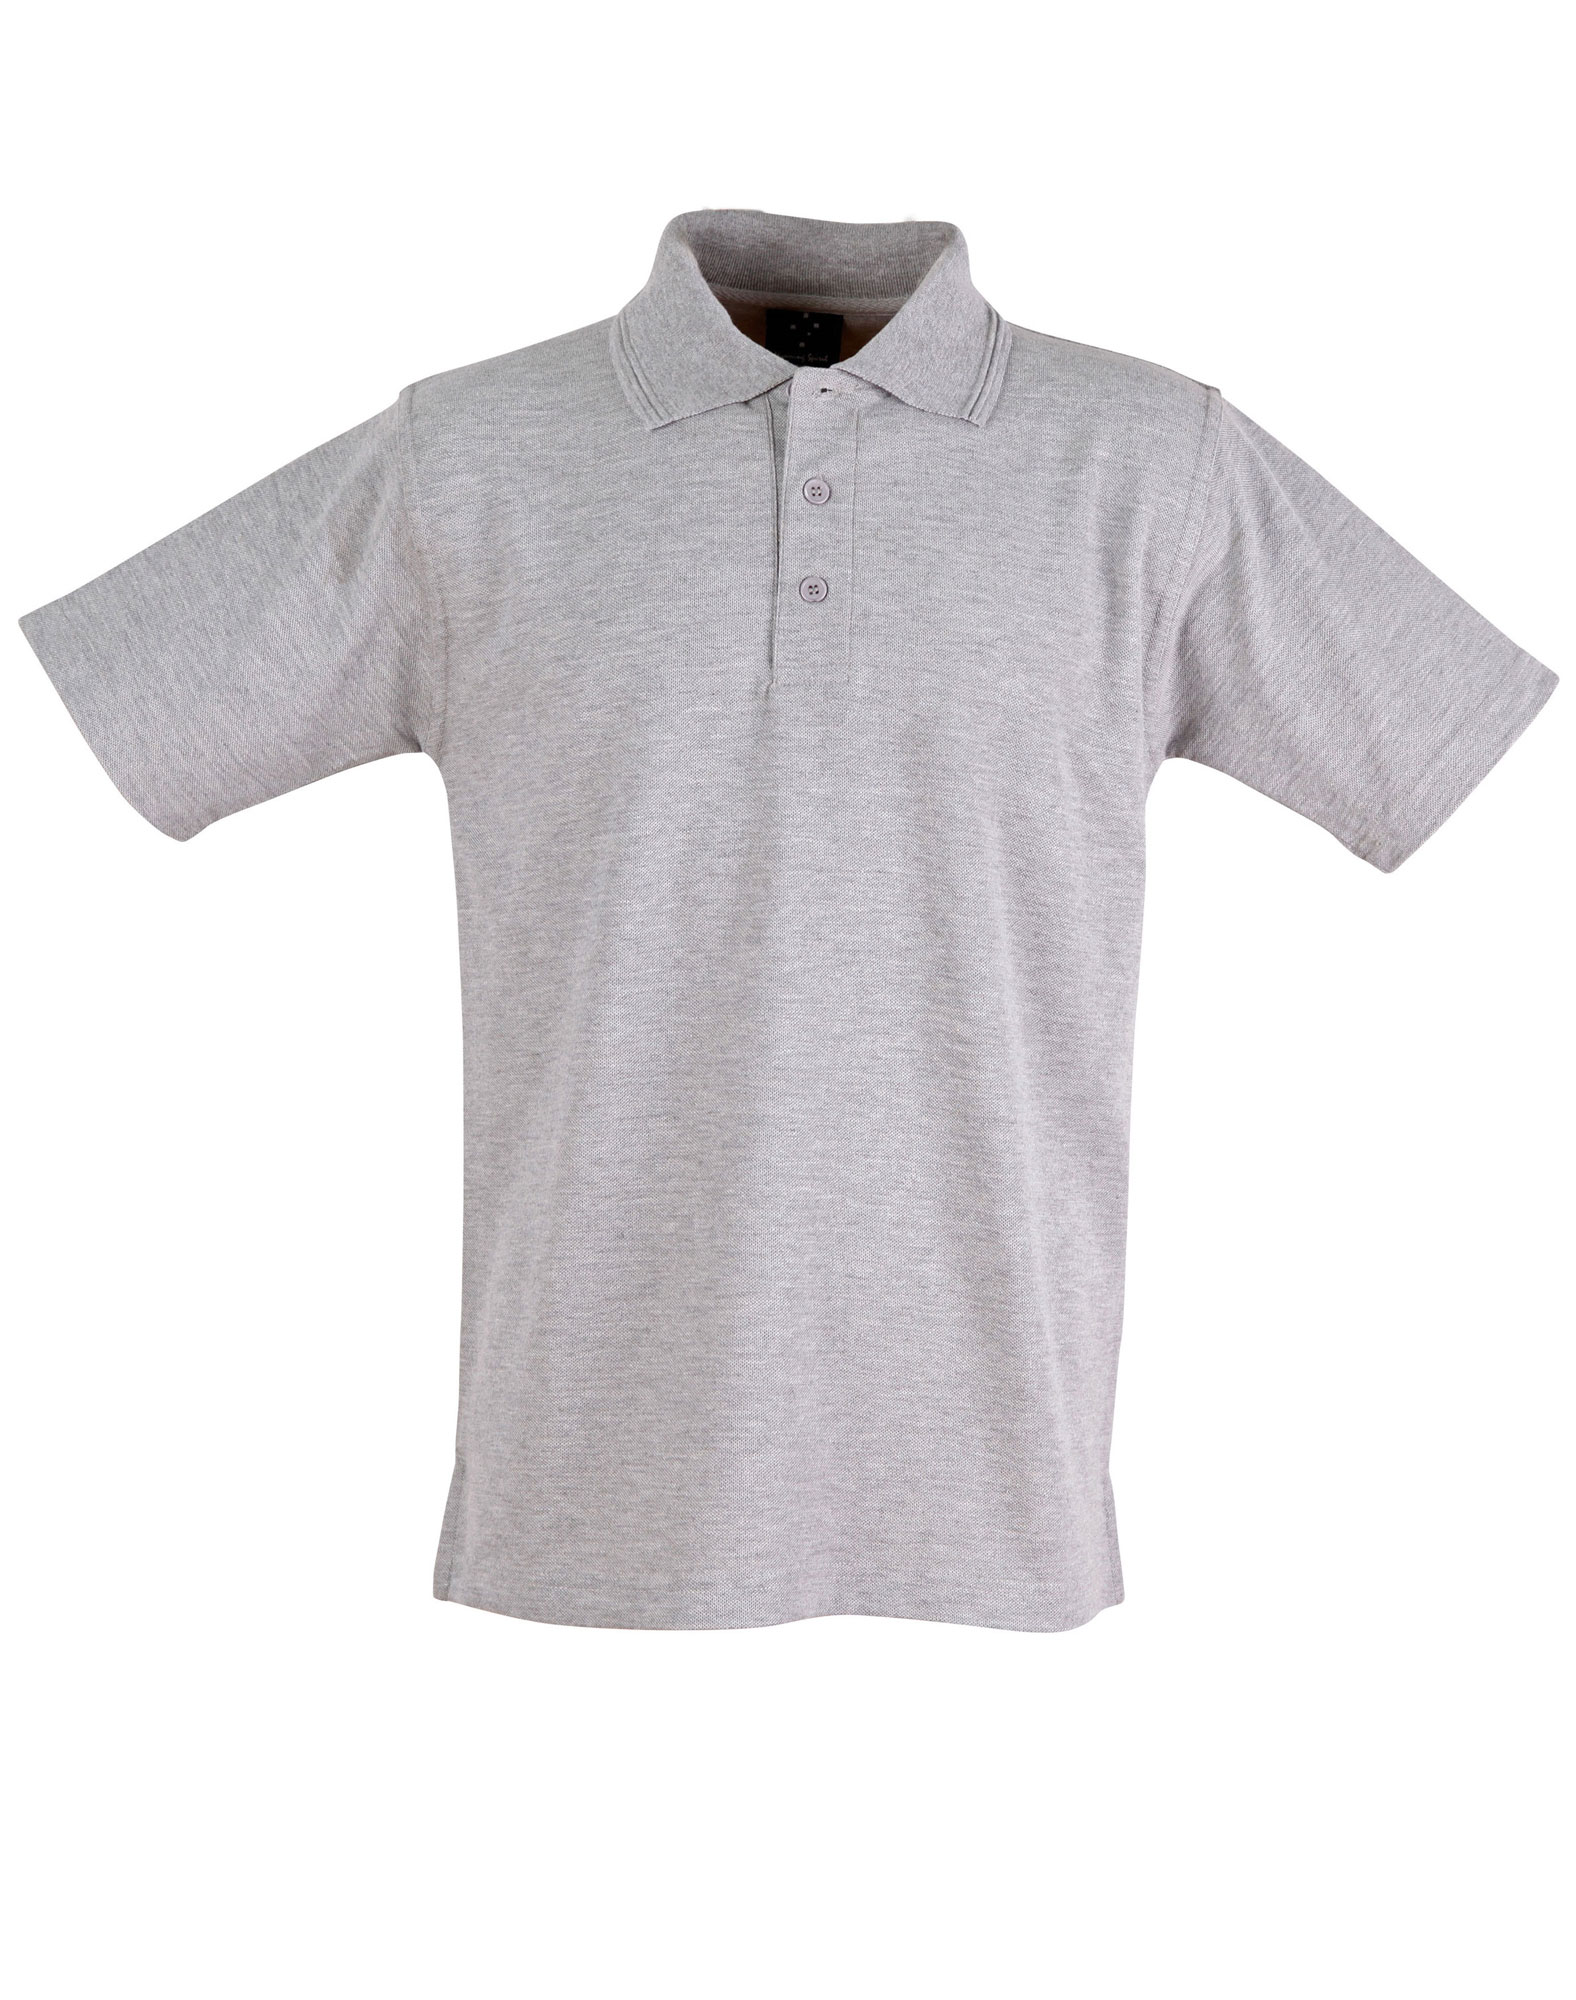 PS11/PS11K TRADITIONAL POLO Unisex